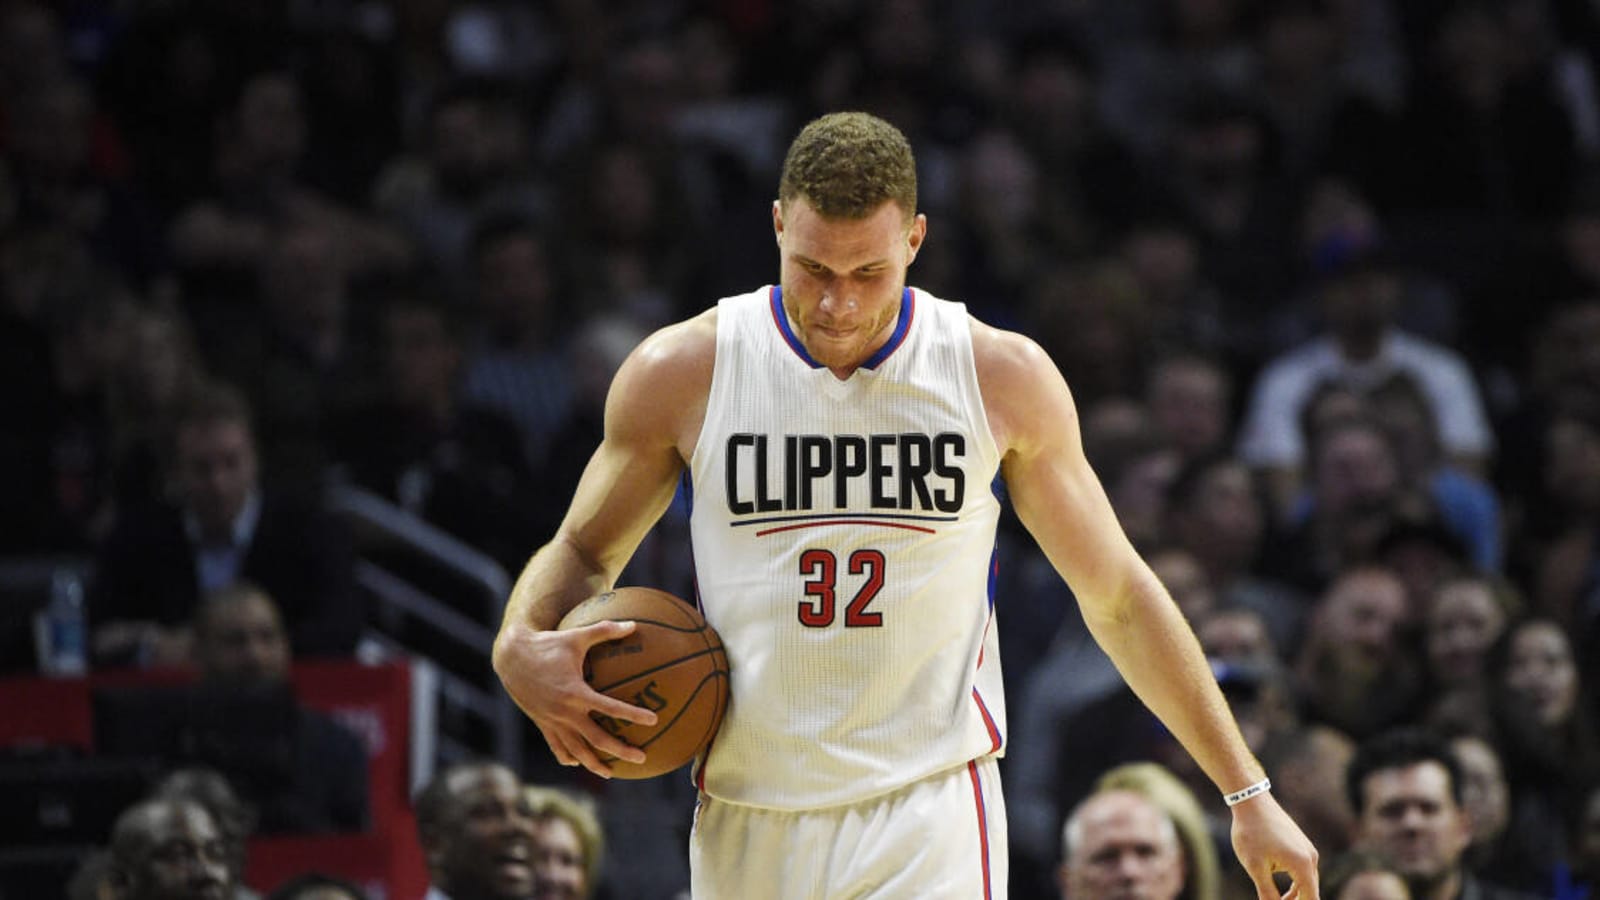 Blake Griffin Retires From The NBA After 14 Seasons